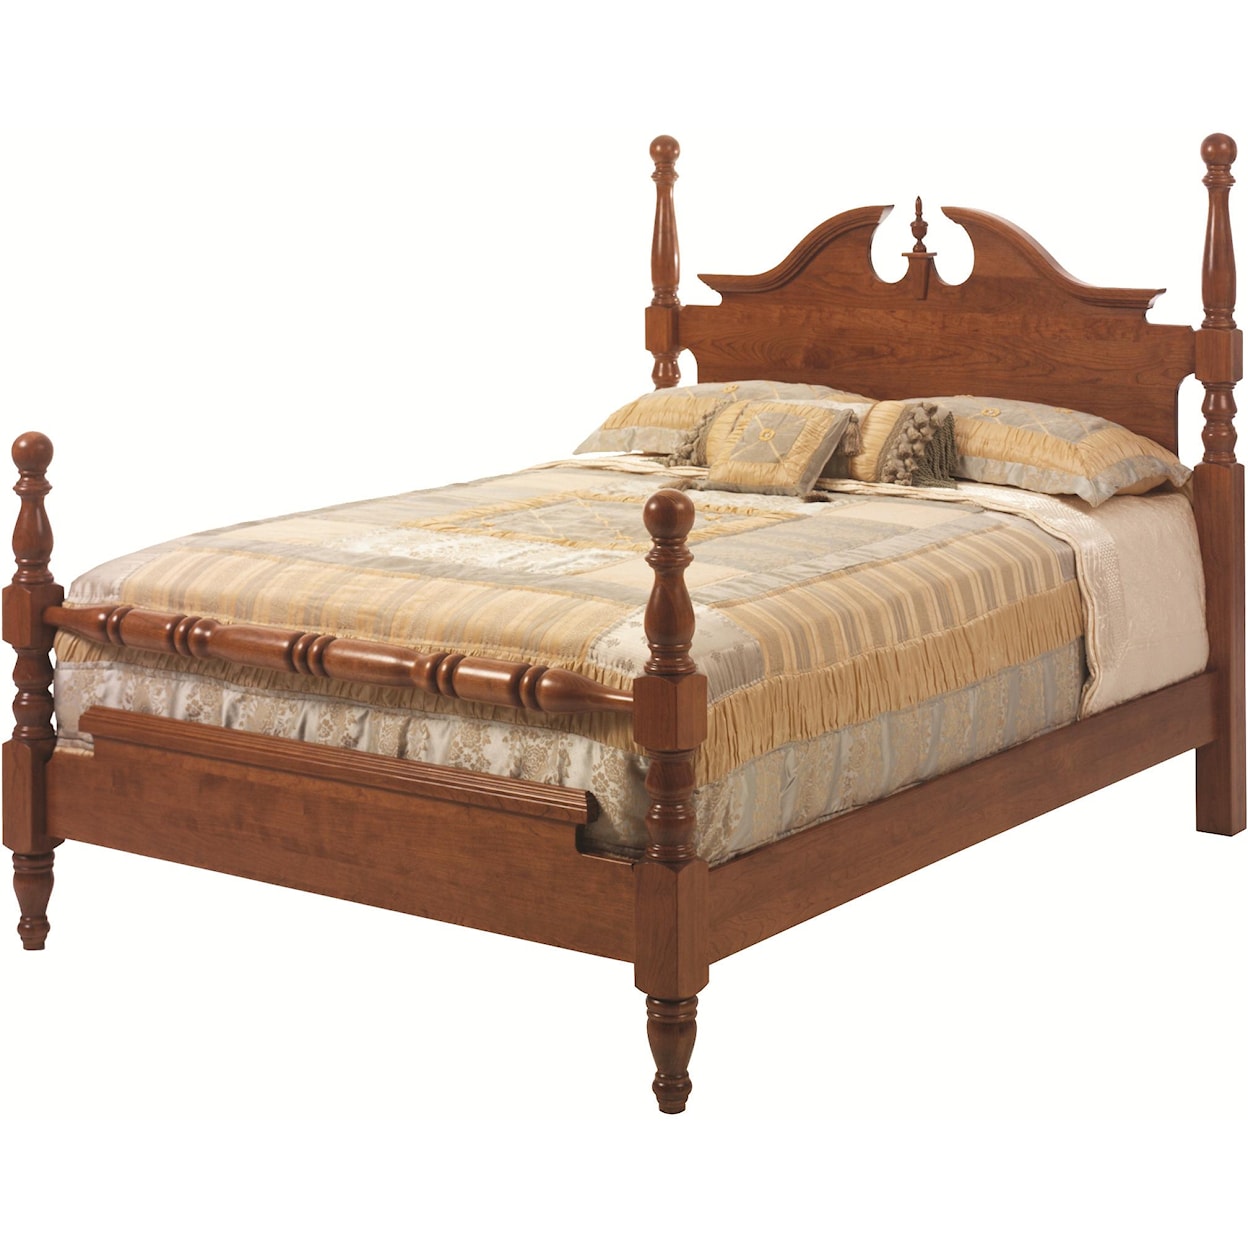 Millcraft Victoria's Tradition King Cannon Ball Bed